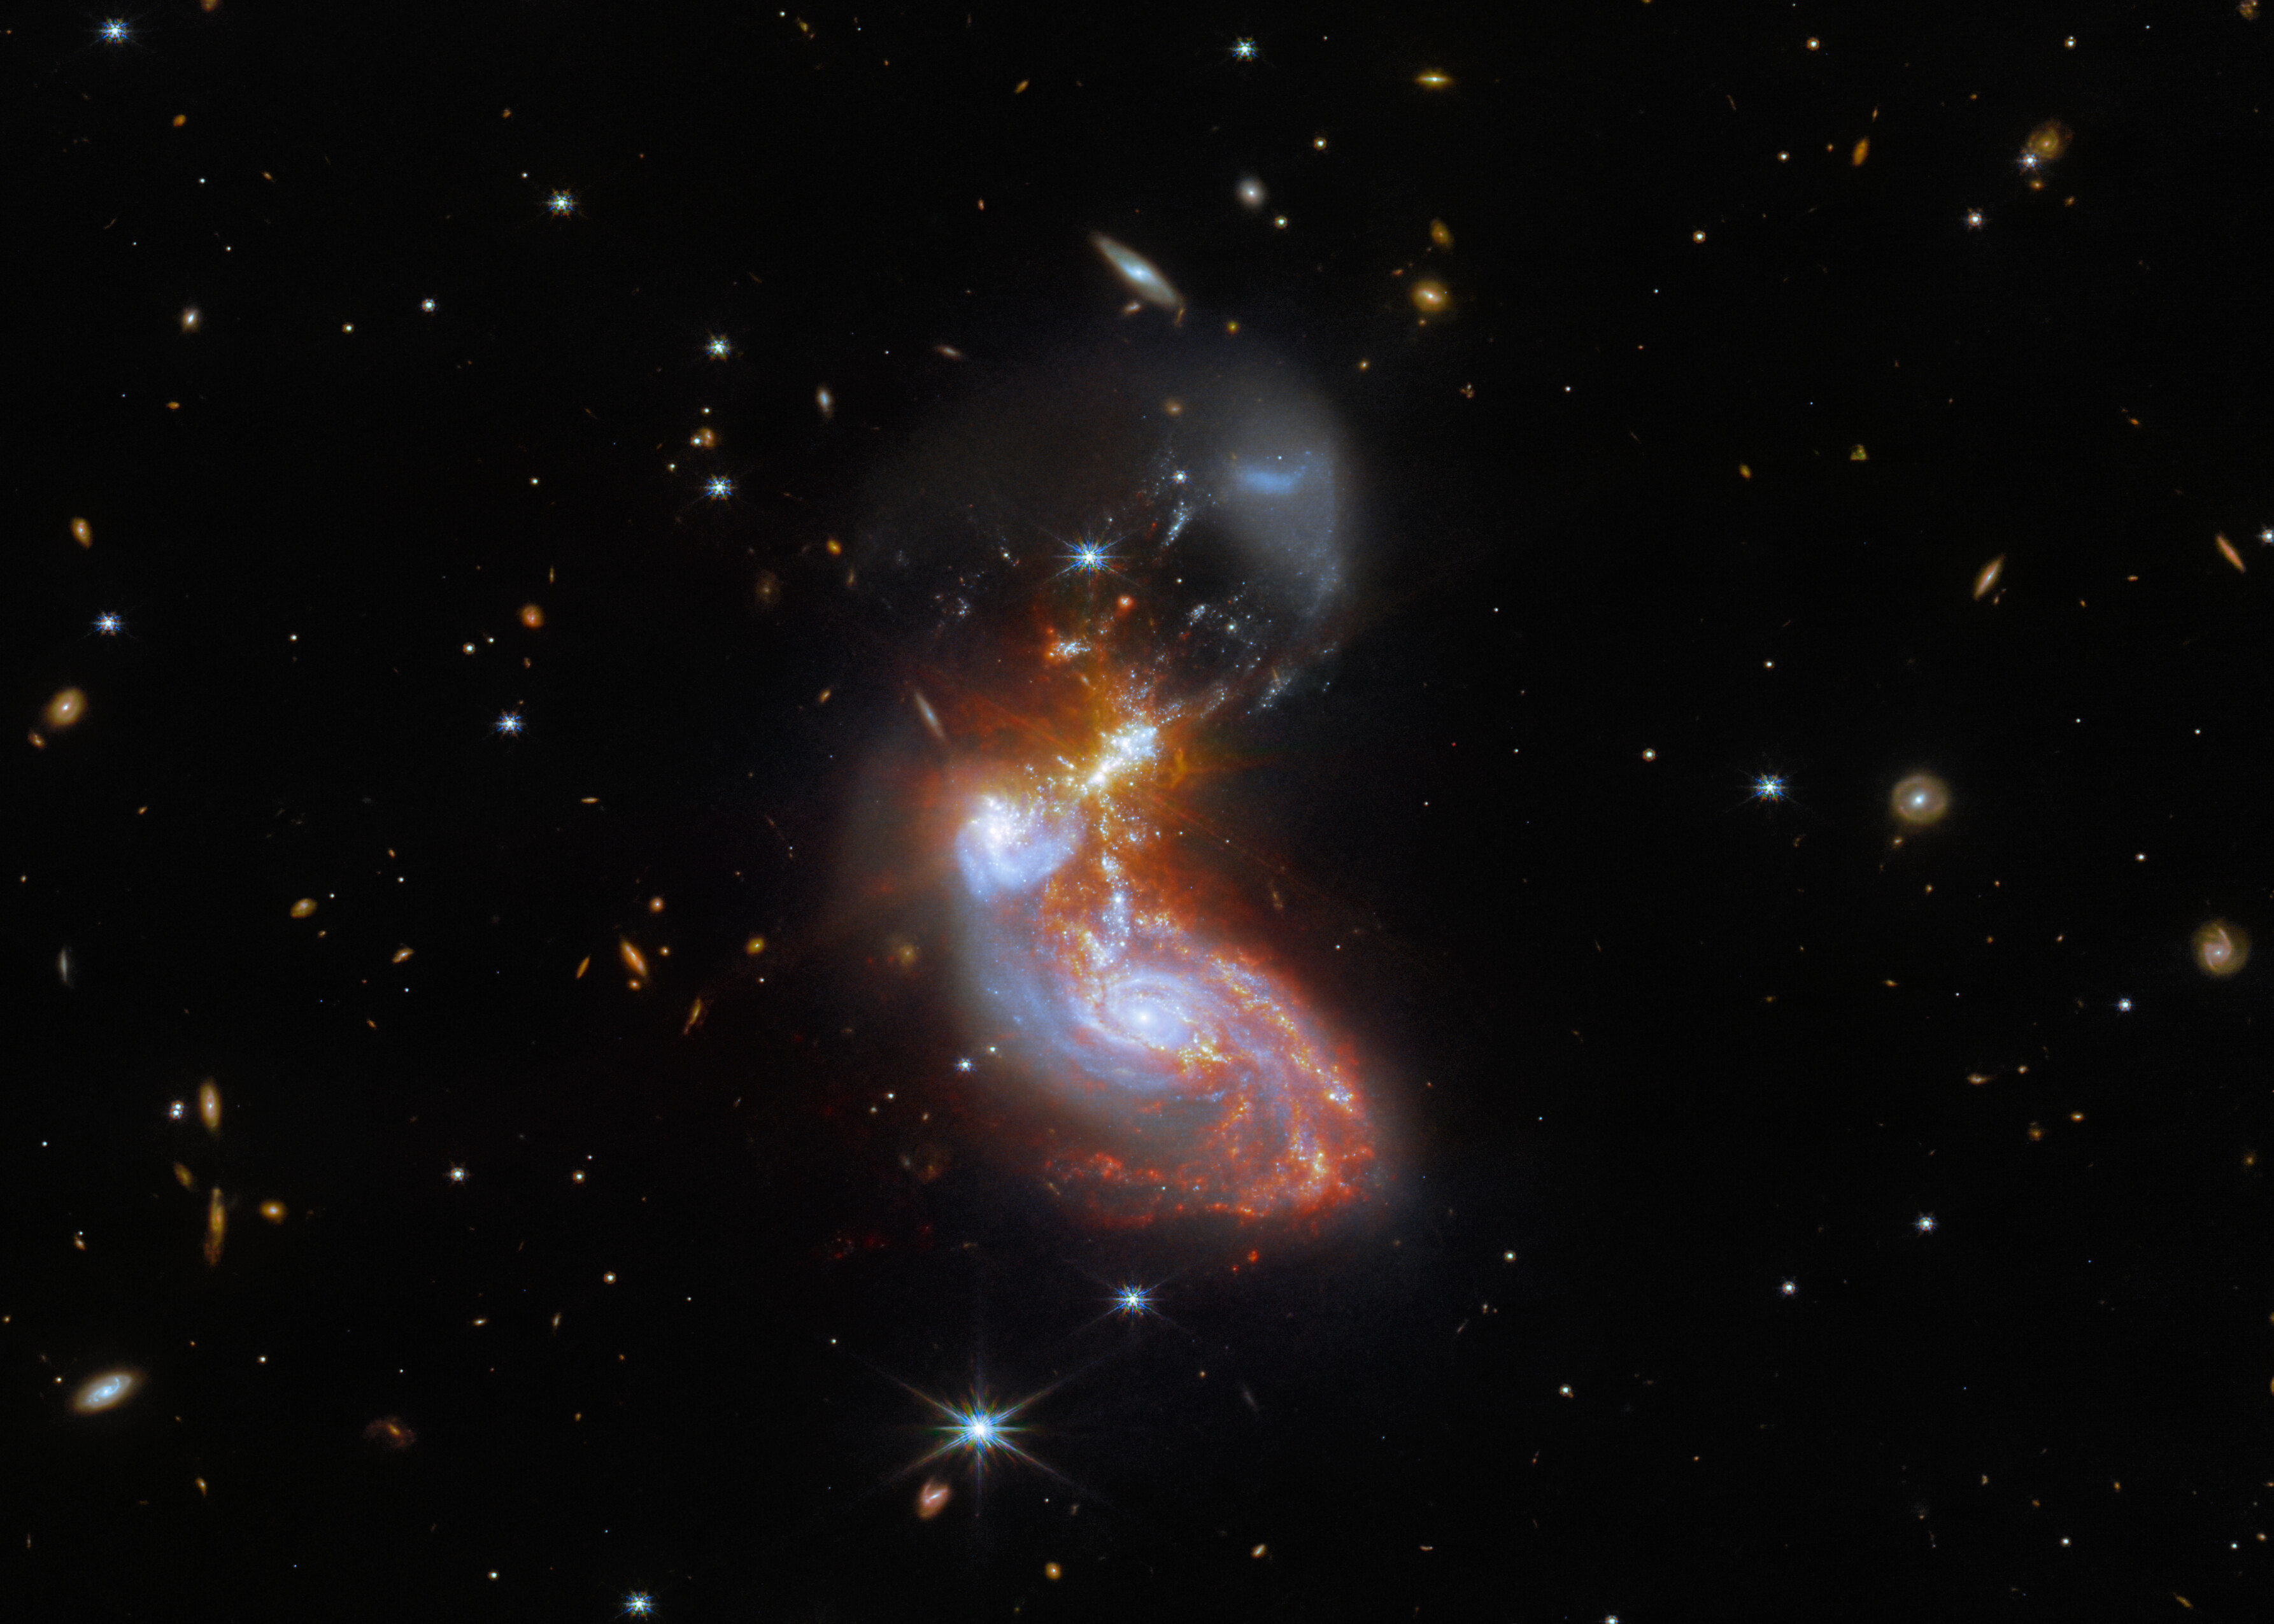 A merging galaxy pair cavort in this image captured by the NASA/ESA/CSA James Webb Space Telescope. This pair of galaxies, known to astronomers as II ZW 96, is roughly 500 million light-years from Earth and lies in the constellation Delphinus, close to the celestial equator. As well as the wild swirl of the merging galaxies, a menagerie of background galaxies are dotted throughout the image. The two galaxies are in the process of merging and as a result have a chaotic, disturbed shape. The bright cores of the two galaxies are connected by bright tendrils of star-forming regions, and the spiral arms of the lower galaxy have been twisted out of shape by the gravitational perturbation of the galaxy merger. It is these star-forming regions that made II ZW 96 such a tempting target for Webb; the galaxy pair is particularly bright at infrared wavelengths thanks to the presence of the star formation. A galaxy merger lies in the centre of this image. The cores of the galaxies, coloured blue, are below-centre. They are surrounded by red star-forming regions which stretch up through and above the centre. Faint yellow diffraction spikes appear in the middle. The lower galaxy is a mostly regular spiral shape, while the upper galaxy has been distorted heavily. The background is black, and covered with many tiny galaxies throughout the scene